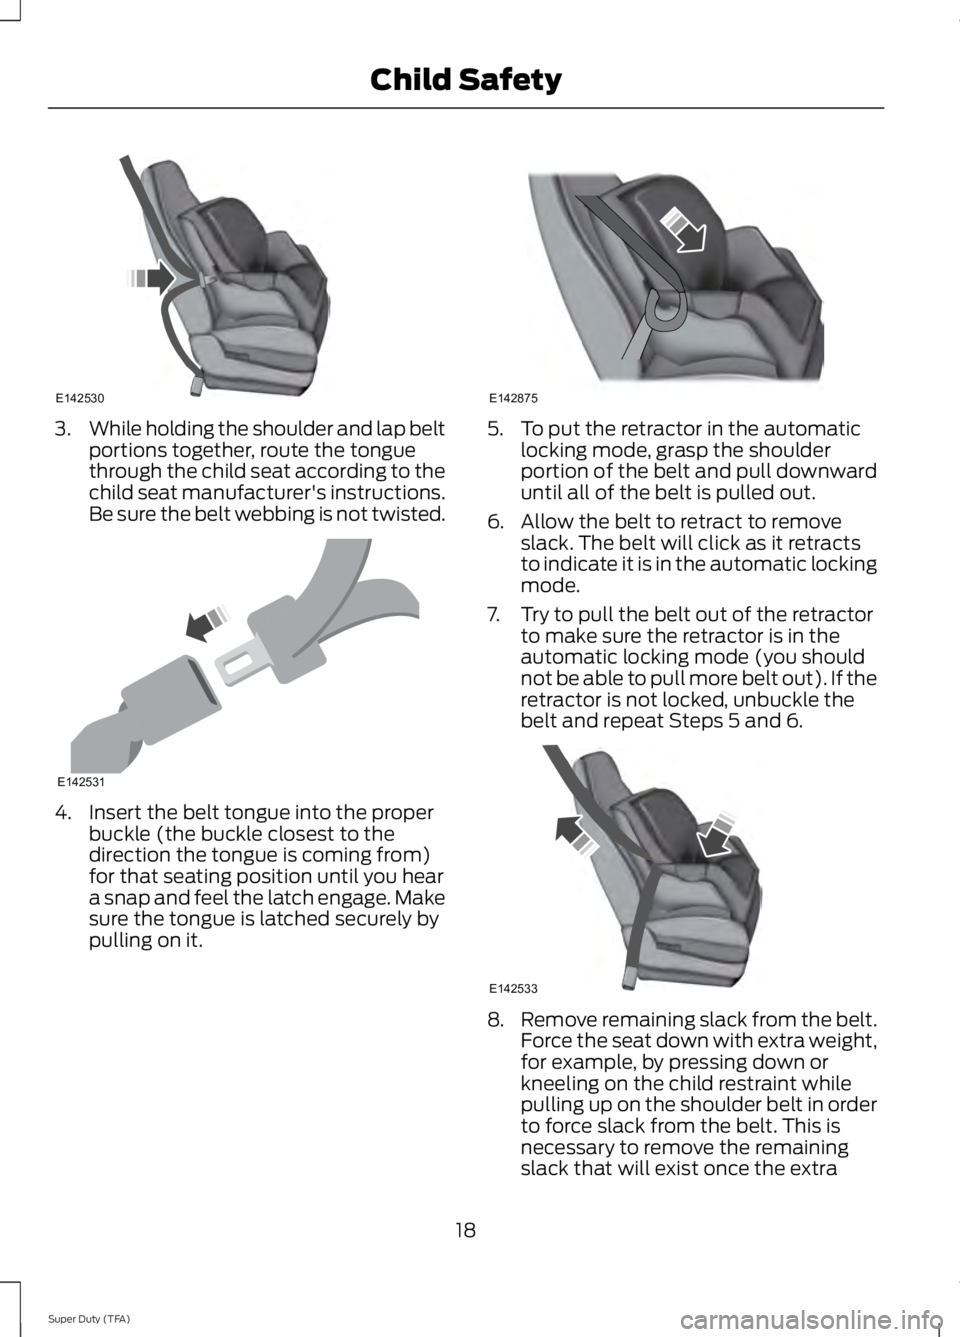 FORD F250 SUPER DUTY 2014  Owners Manual 3.While holding the shoulder and lap beltportions together, route the tonguethrough the child seat according to thechild seat manufacturer's instructions.Be sure the belt webbing is not twisted.
4